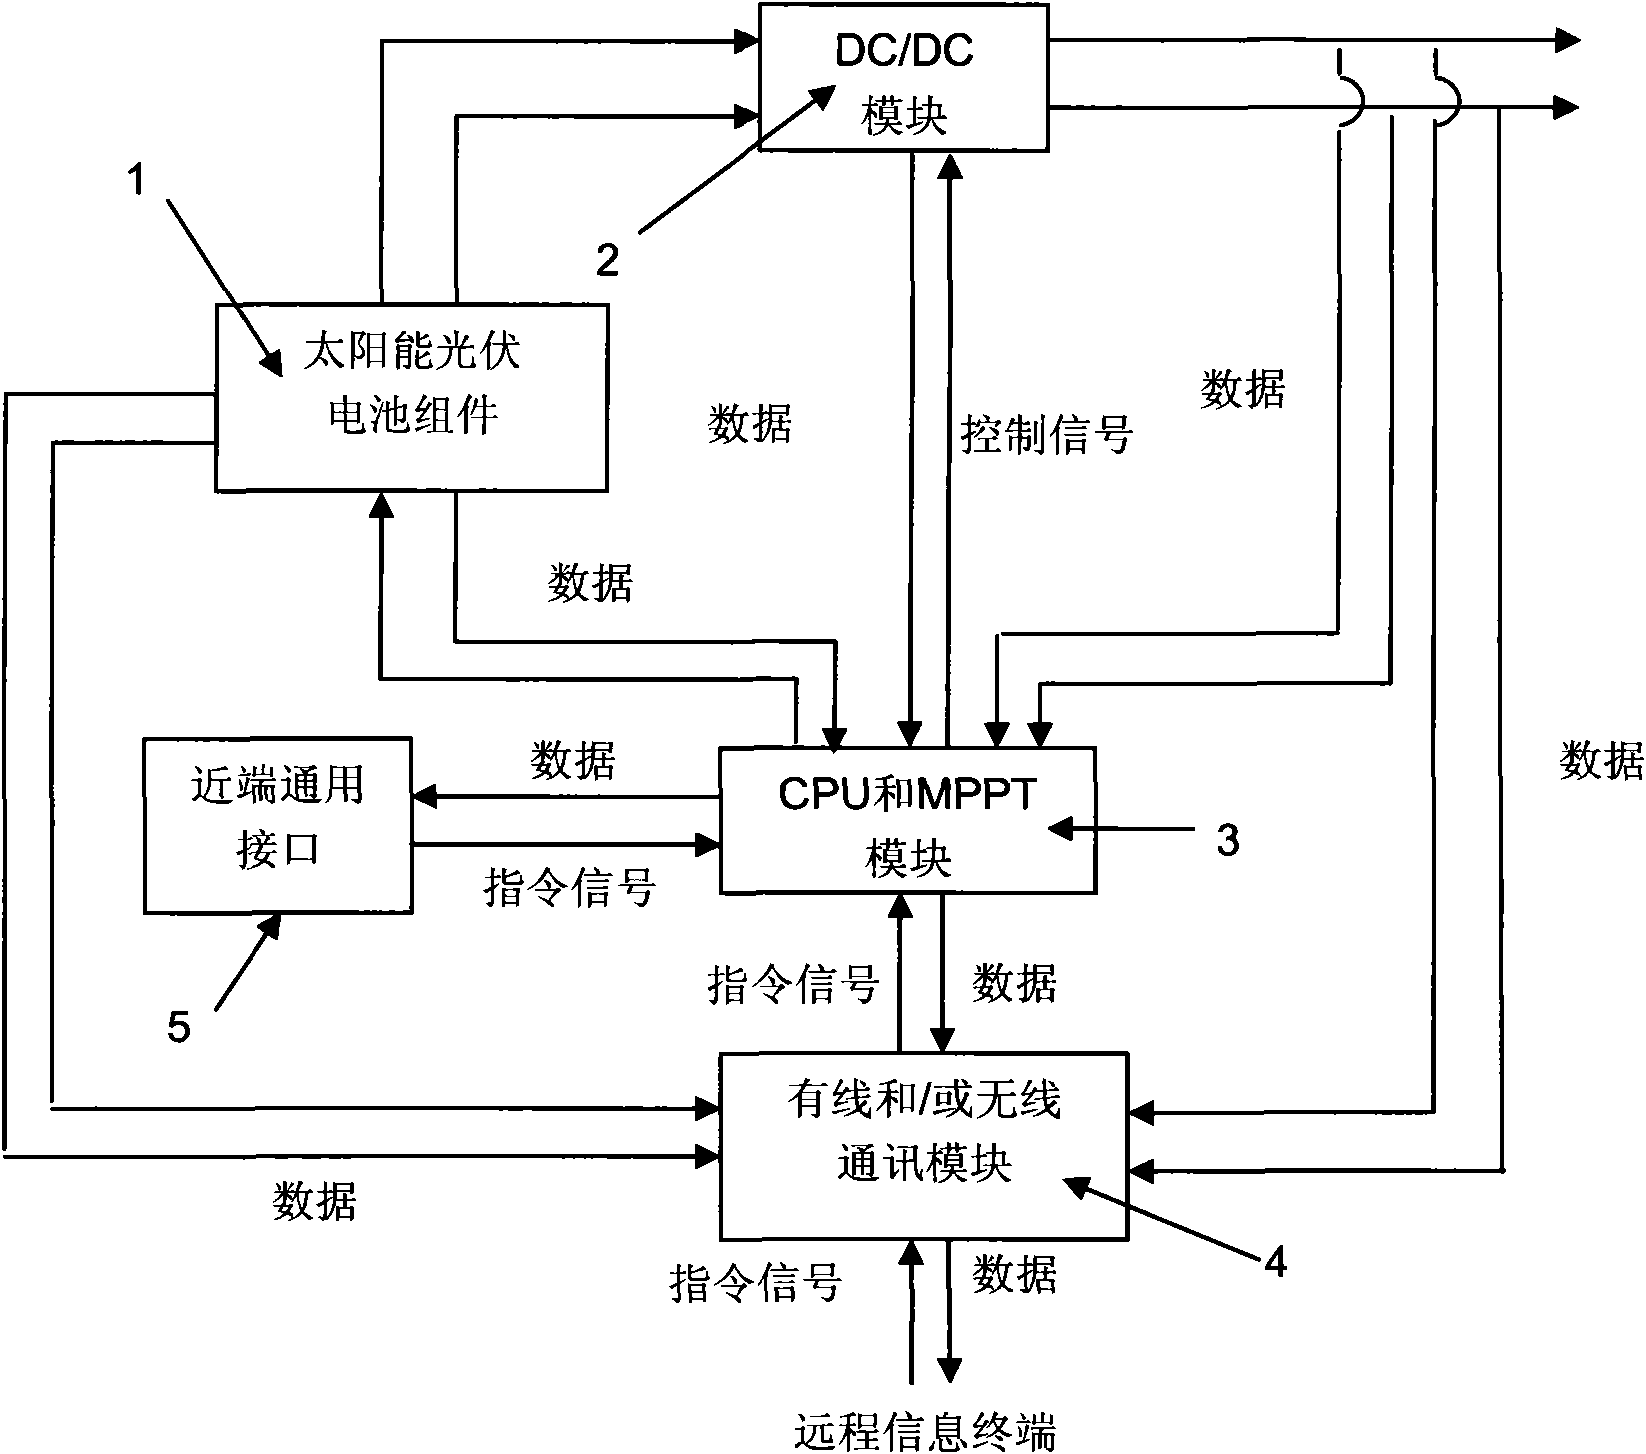 Solar photovoltaic control system with dynamic adjustable output of current and voltage